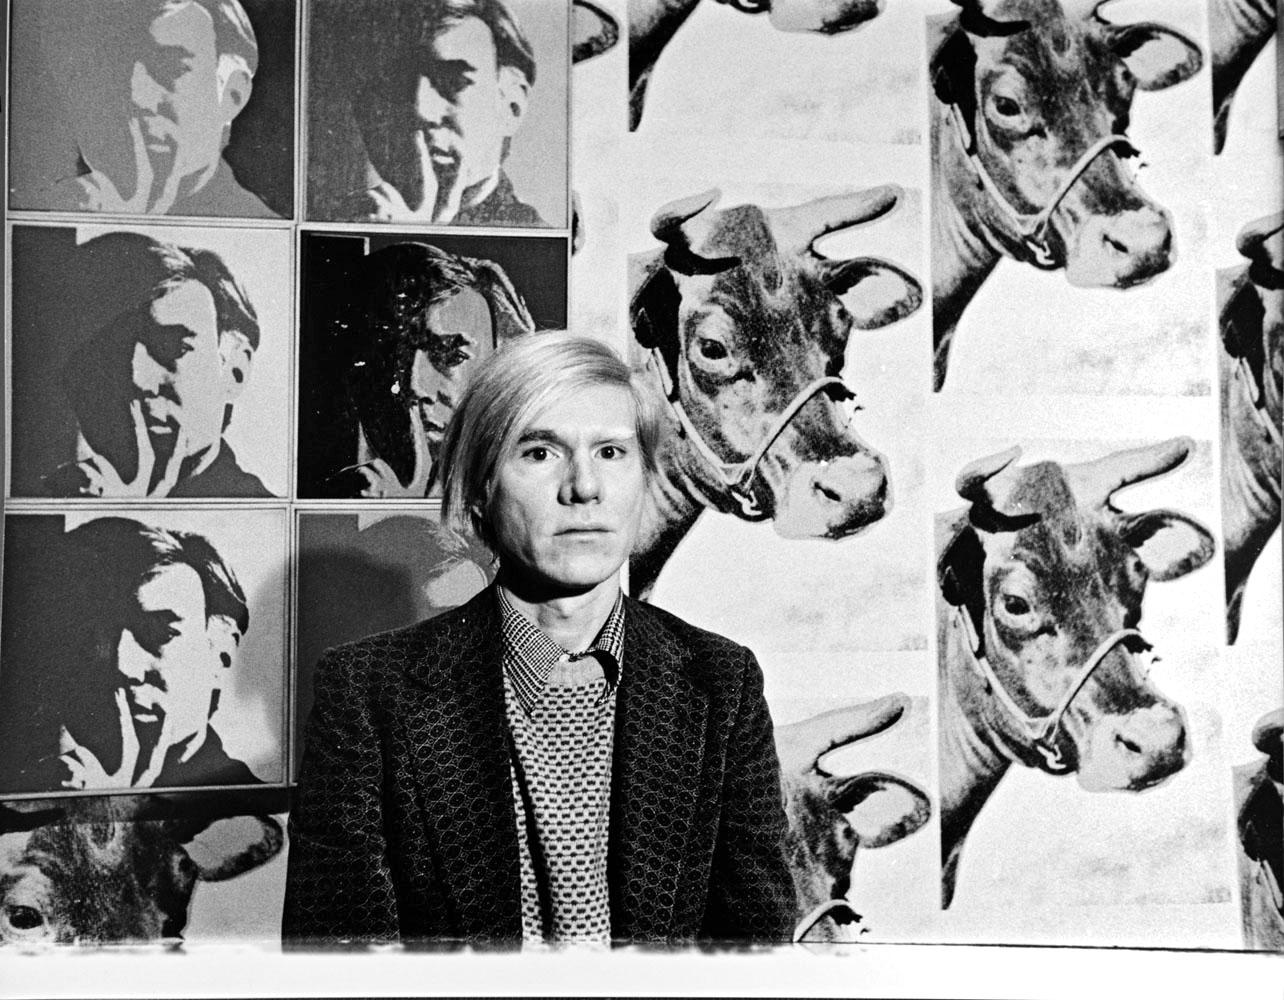  Artist Andy Warhol at his Whitney Museum Retrospective